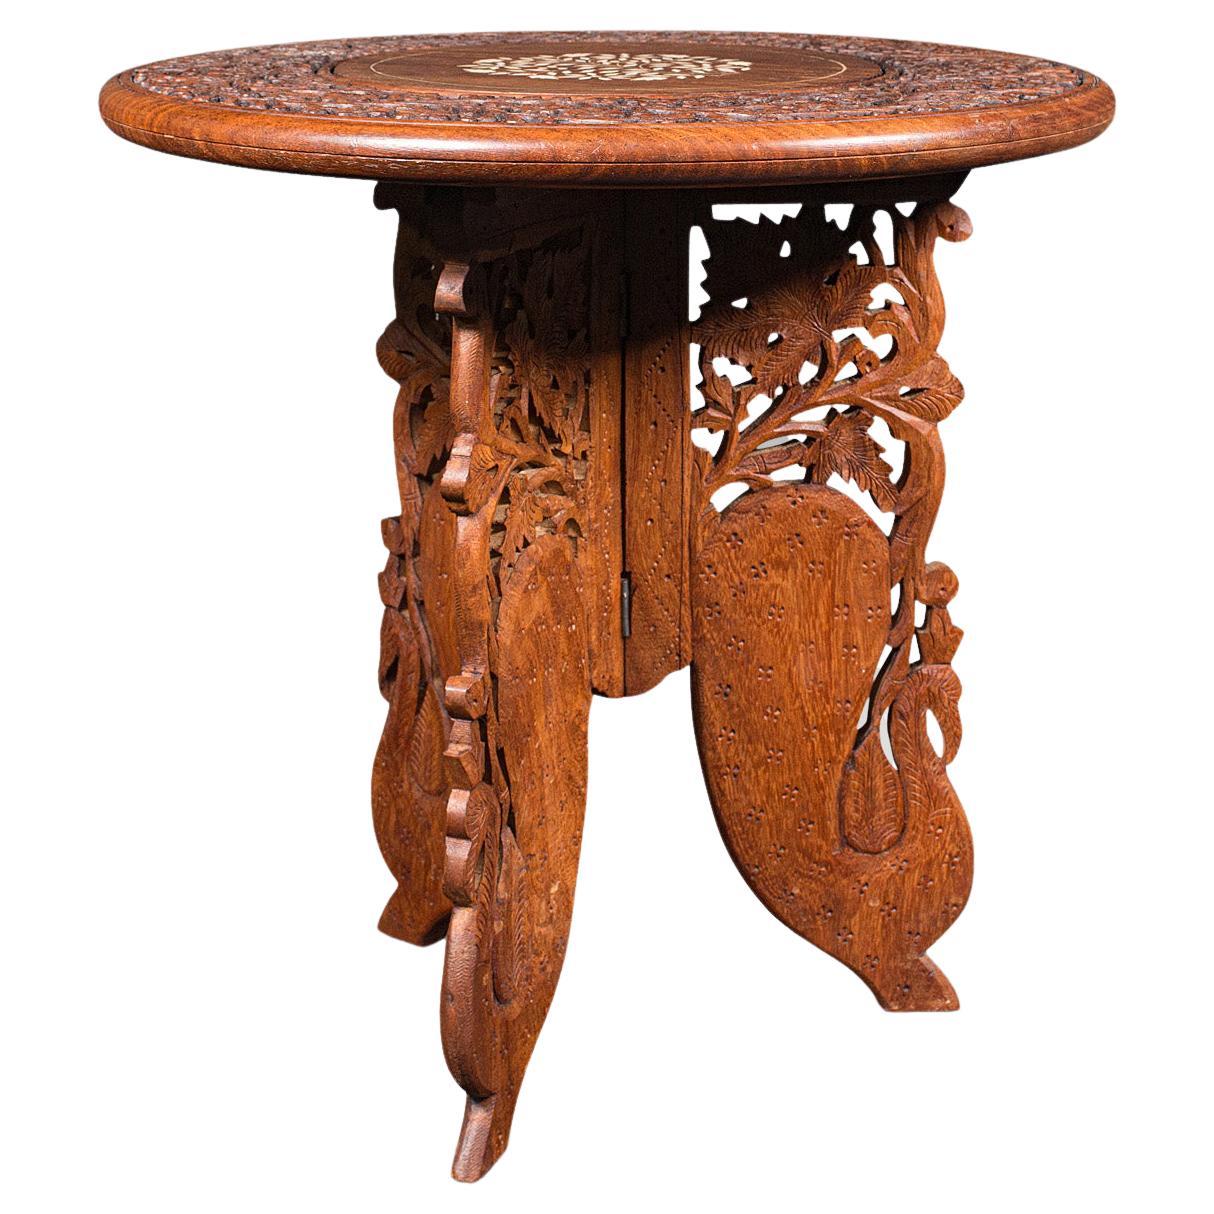 Vintage Circular Side Table, Anglo-Indian, Teak, Lamp, Wine, Colonial, Art Deco For Sale